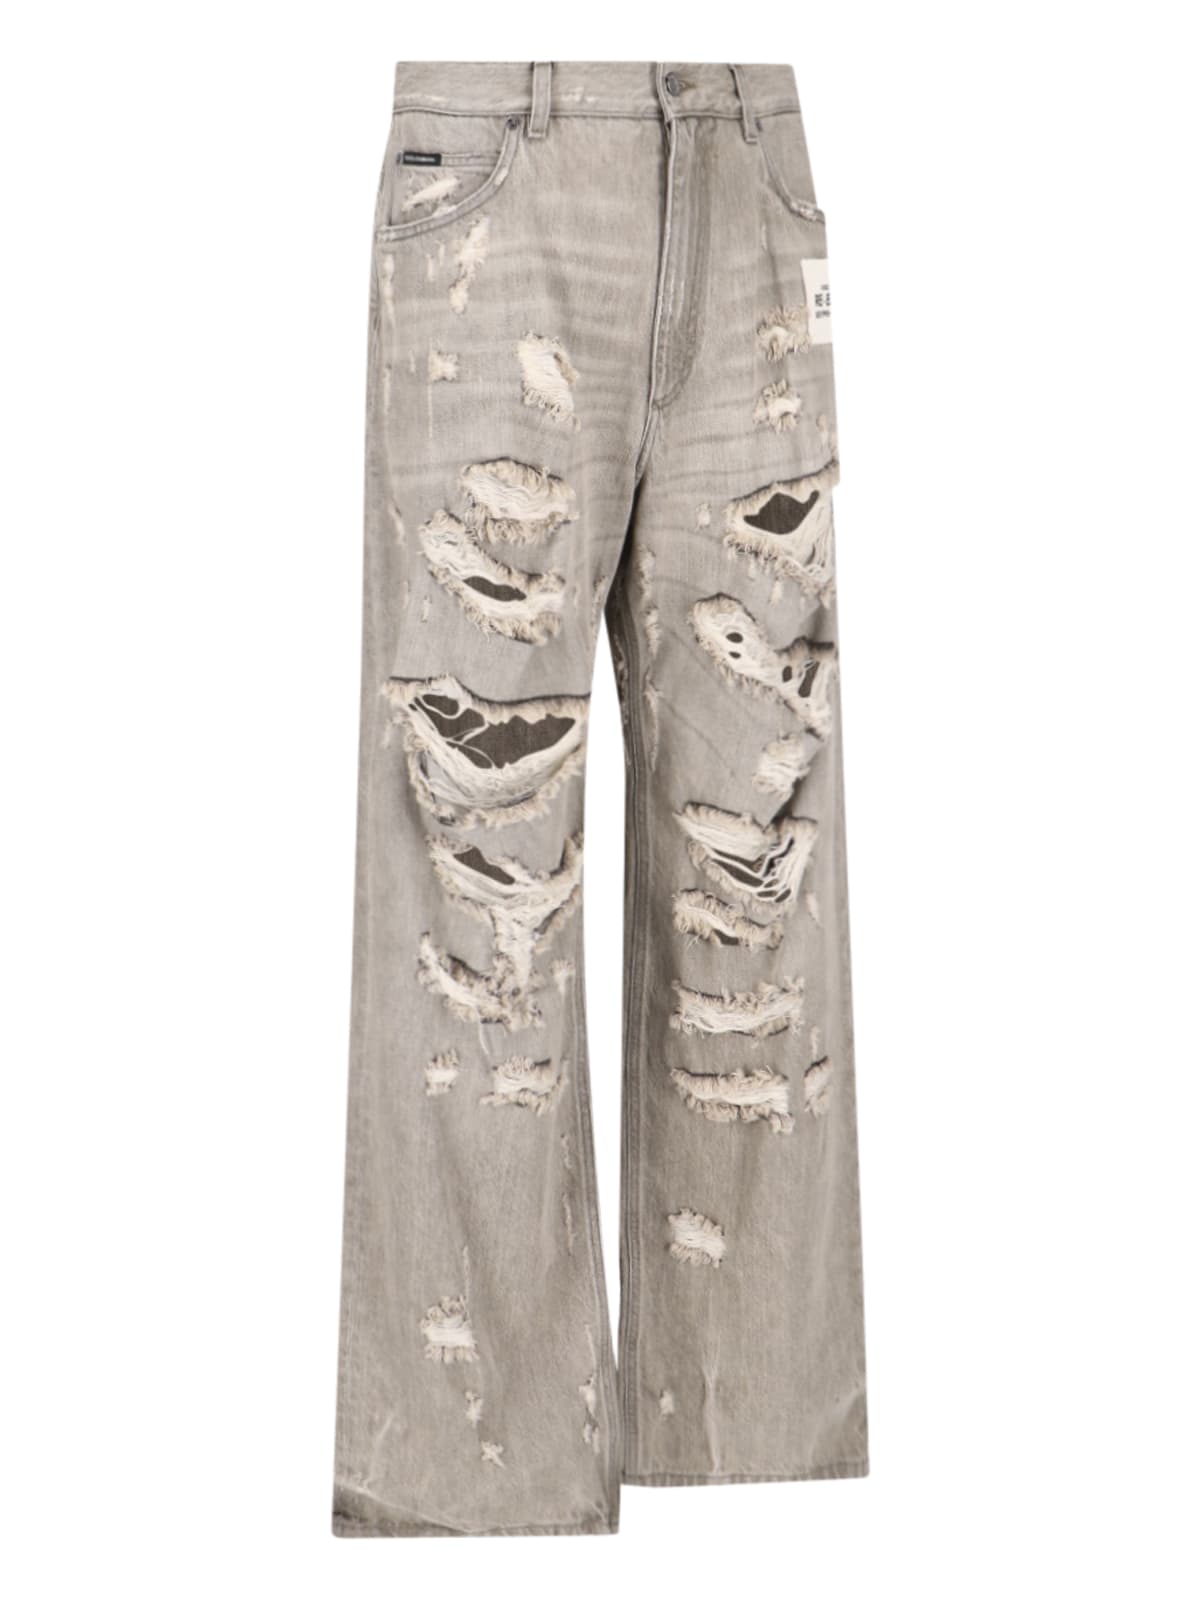 Shop Dolce & Gabbana S/s 1995 Re-edition Jeans In Gray